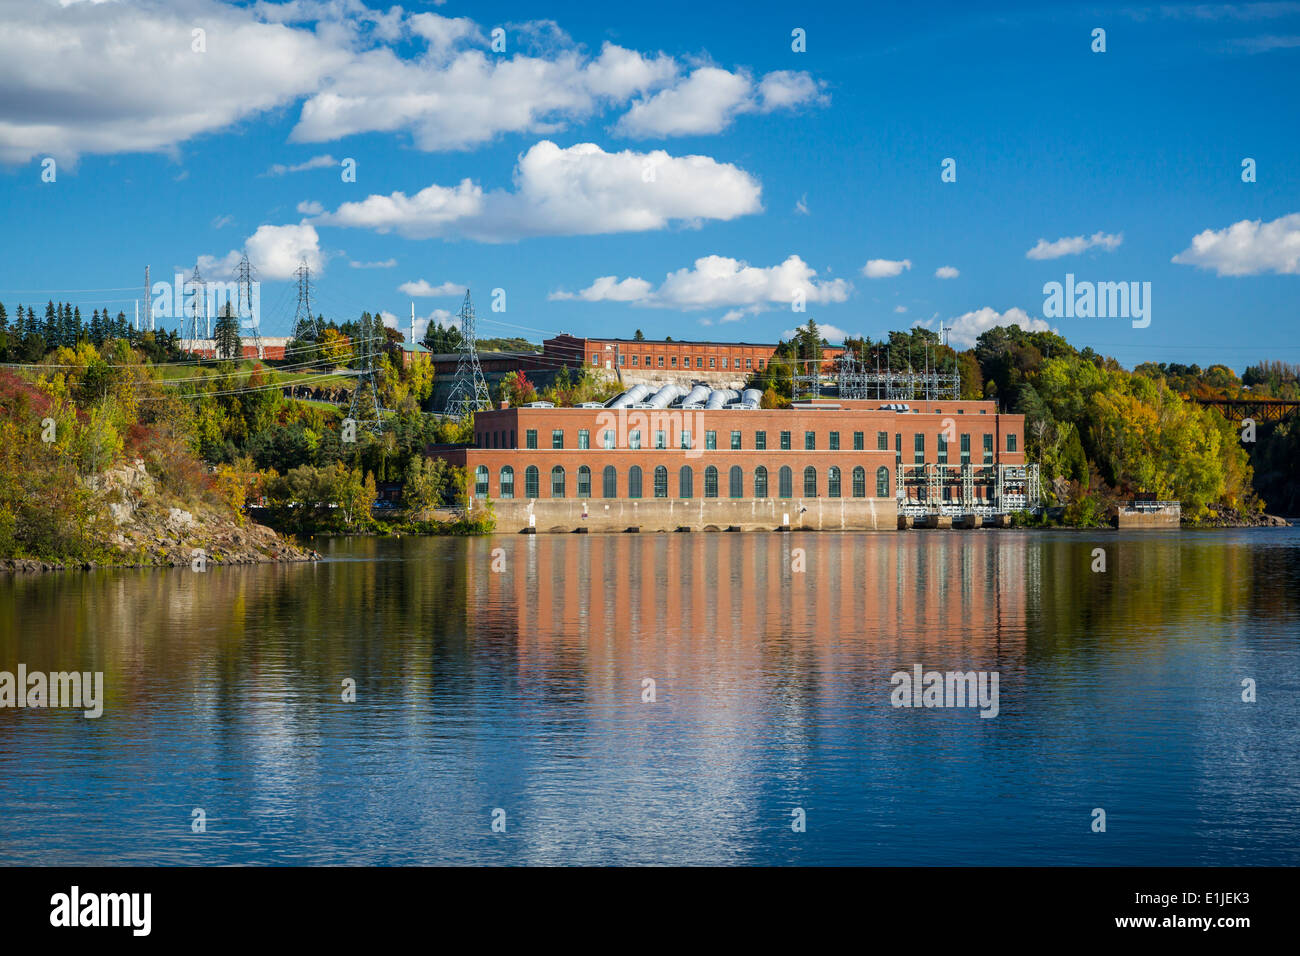 The Hydro Quebec electrical power plant reflected in the Saint-Maurice River in Shawinigan, Quebec, Canada. Stock Photo